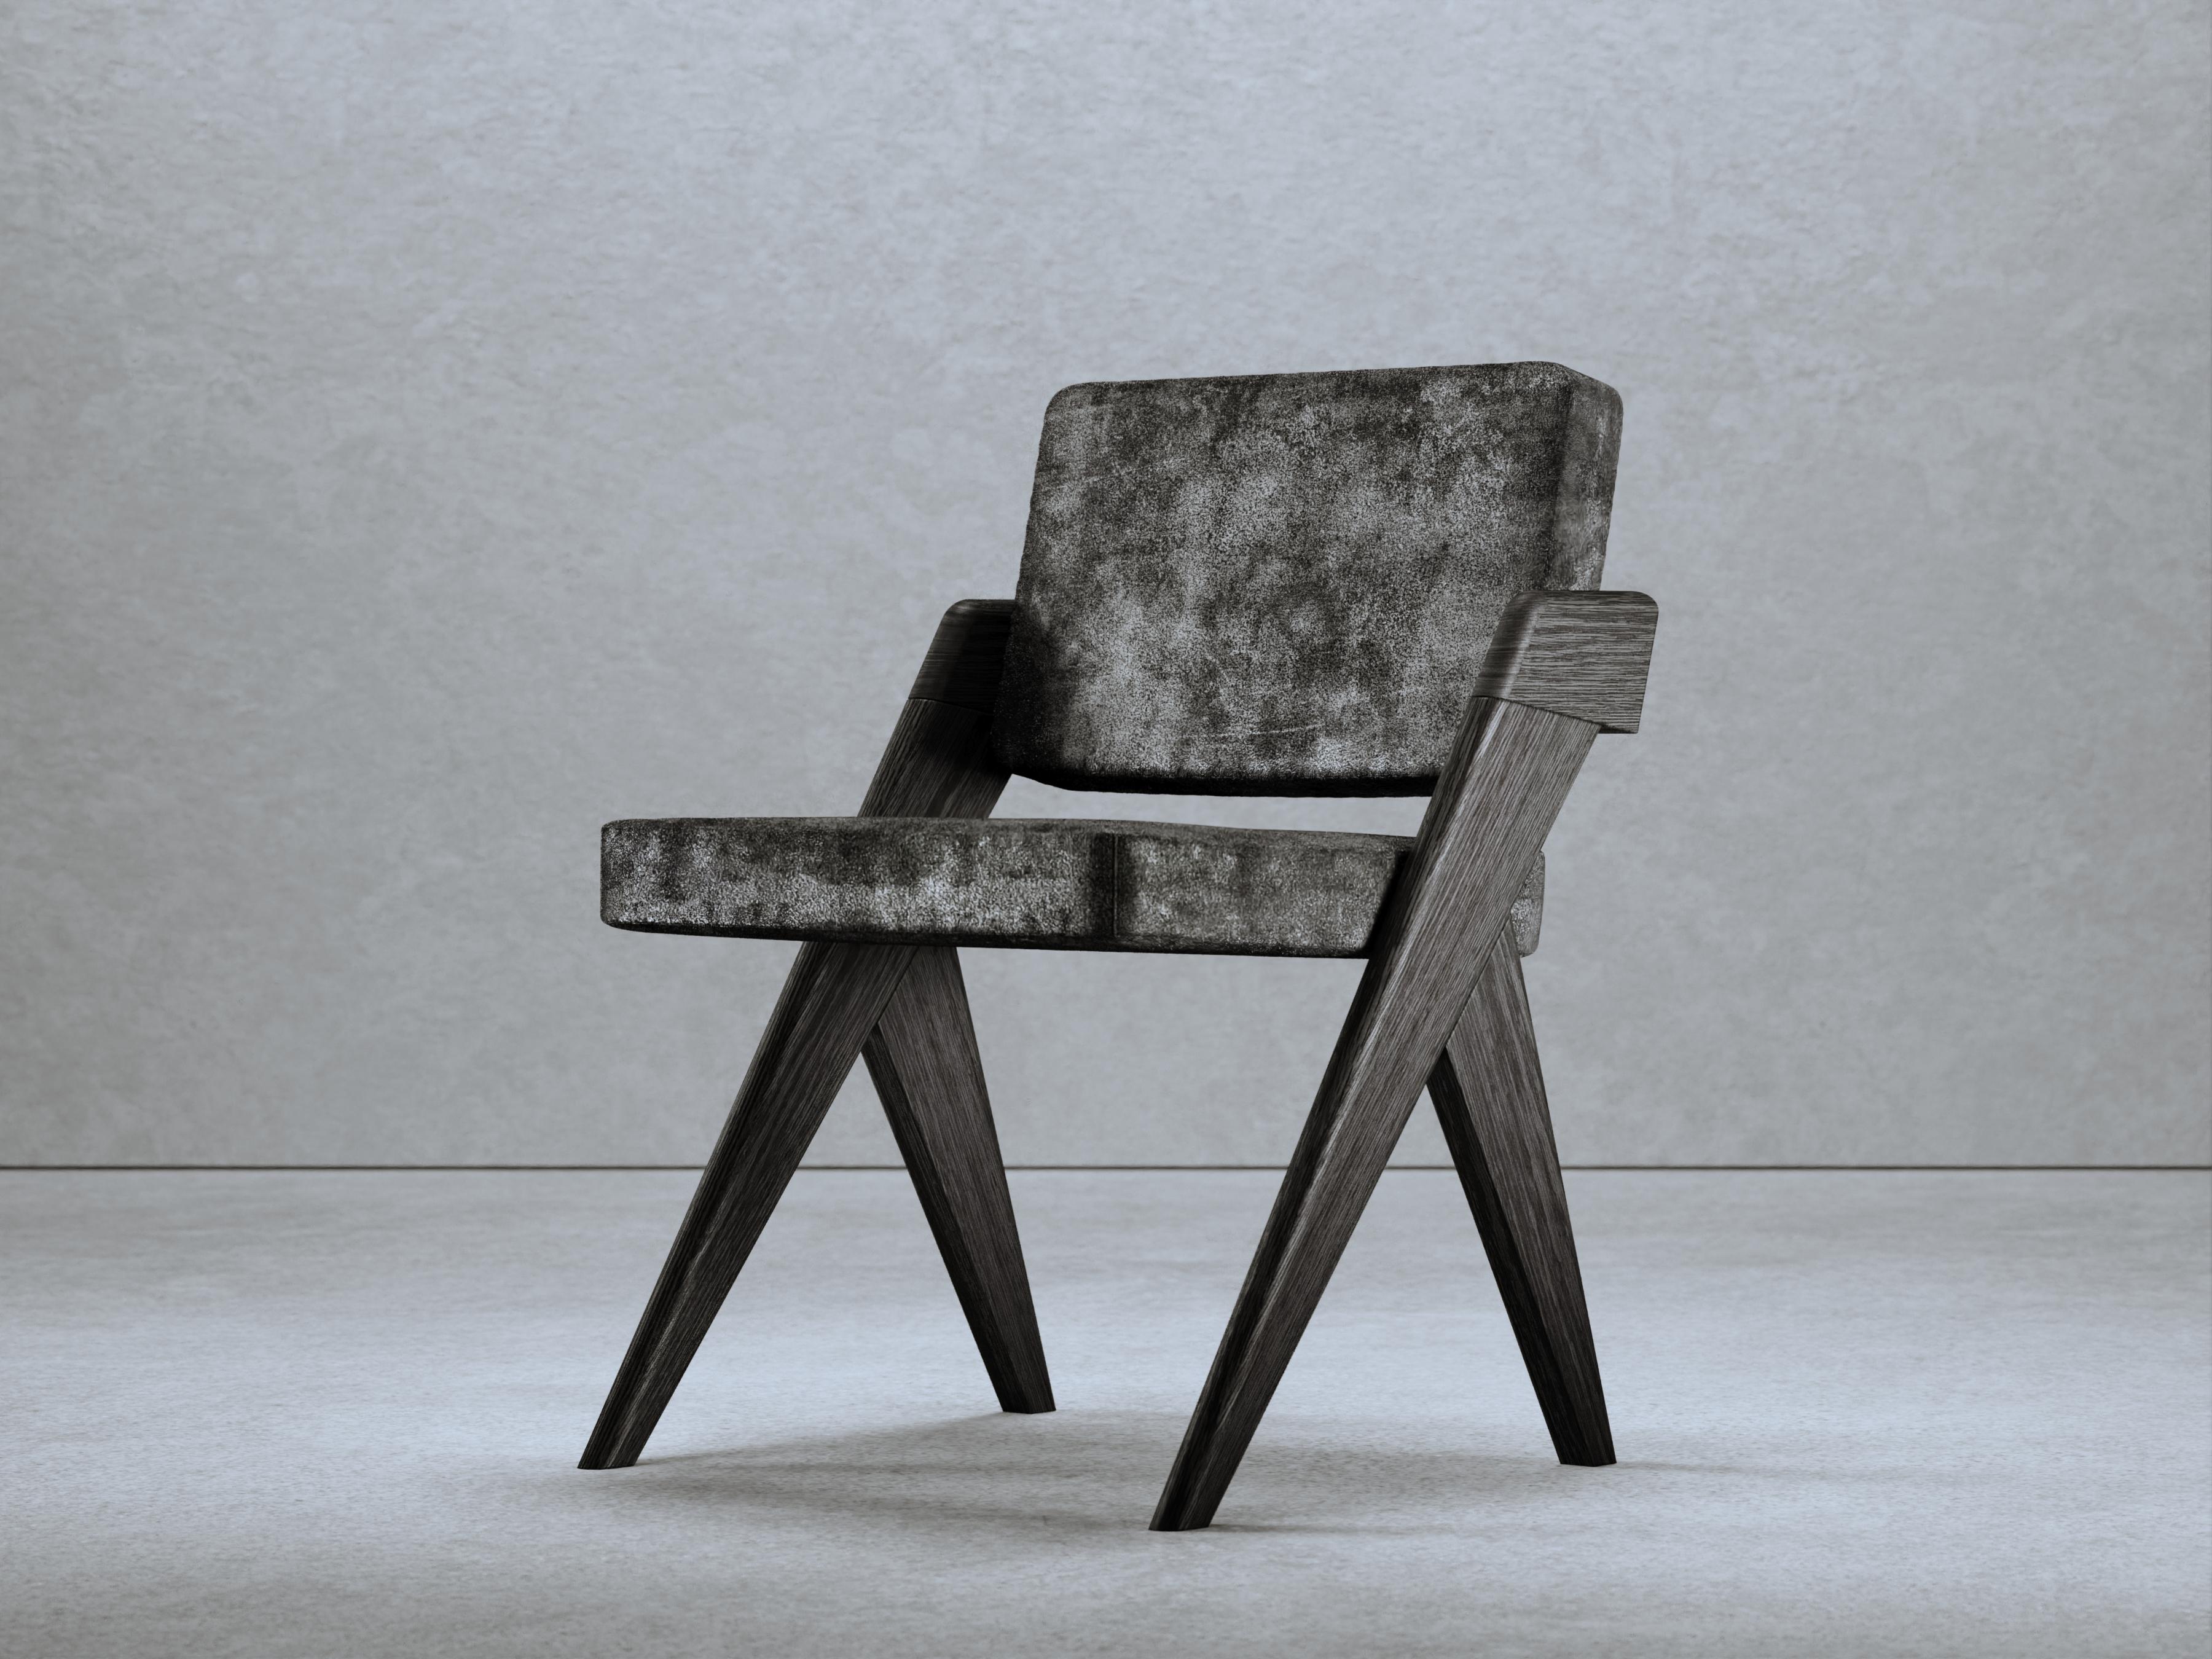 Wild Leather Souvenir Chair by Gio Pagani
Dimensions: D 55 x W 50 x H 88 cm. SH: 48 cm.
Materials: Black elm wood and black wild leather.

In a fluid society capable of mixing infinite social and cultural varieties, the nostalgic search for reworked